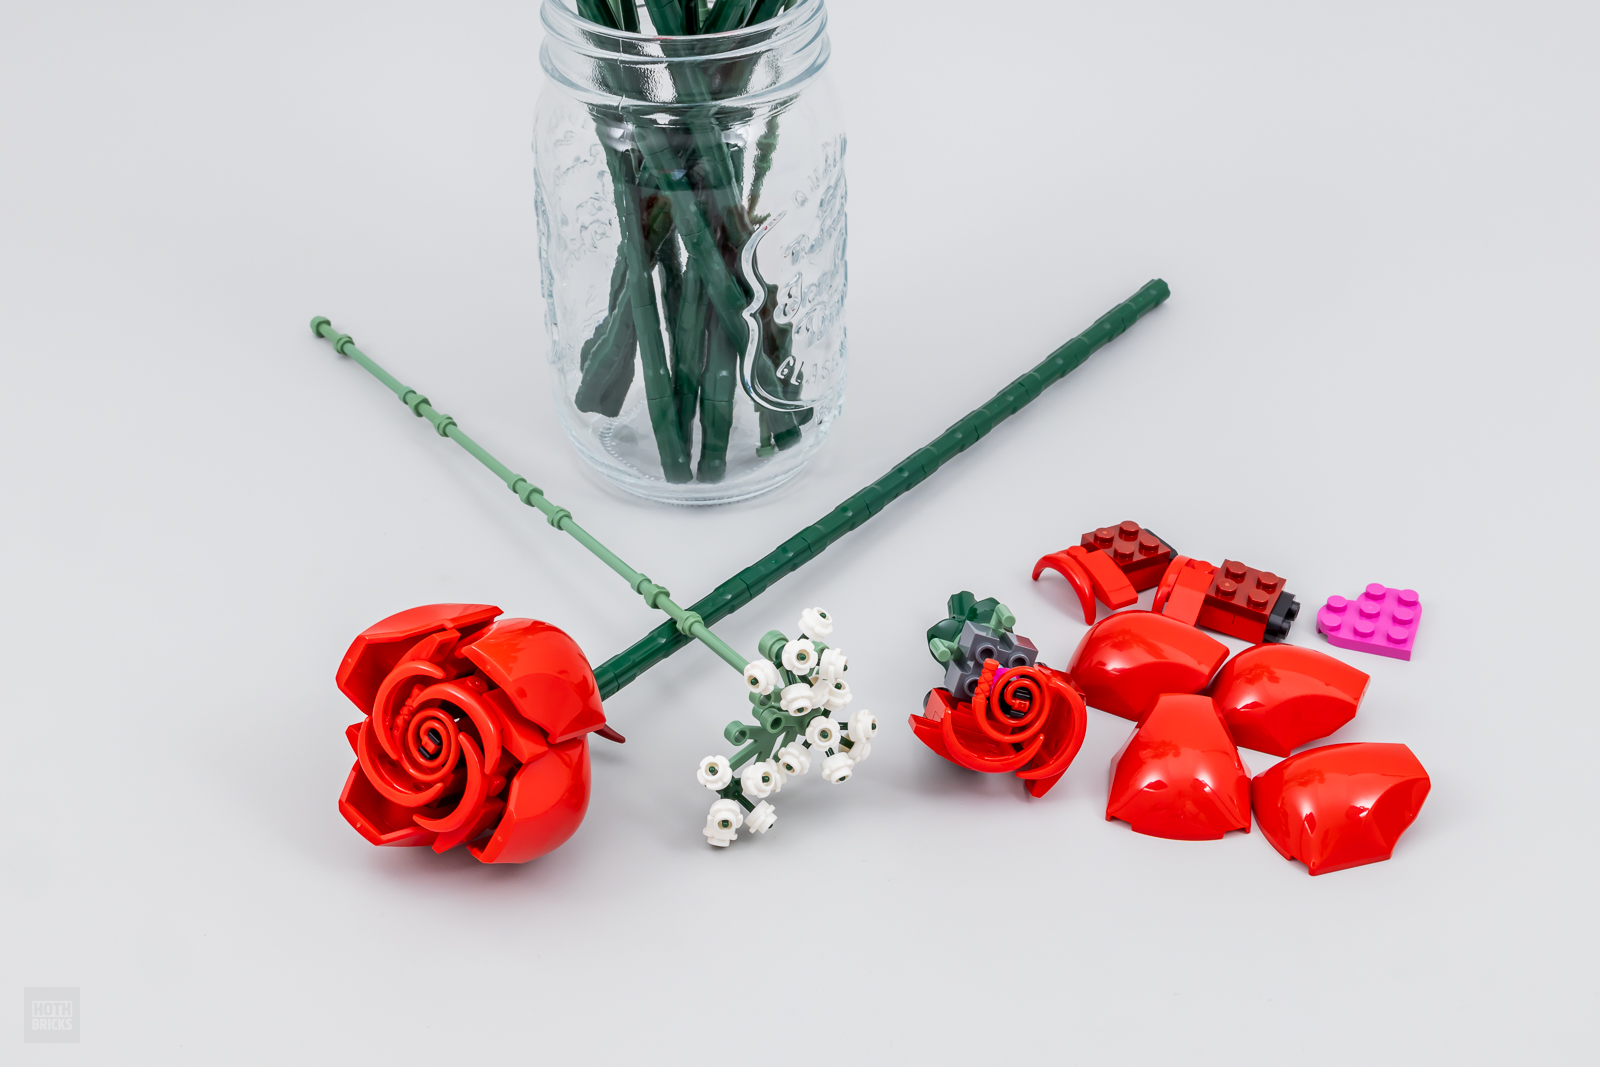 Lego Roses Botanical Collection (40460)🌹 - Lego Build & Review